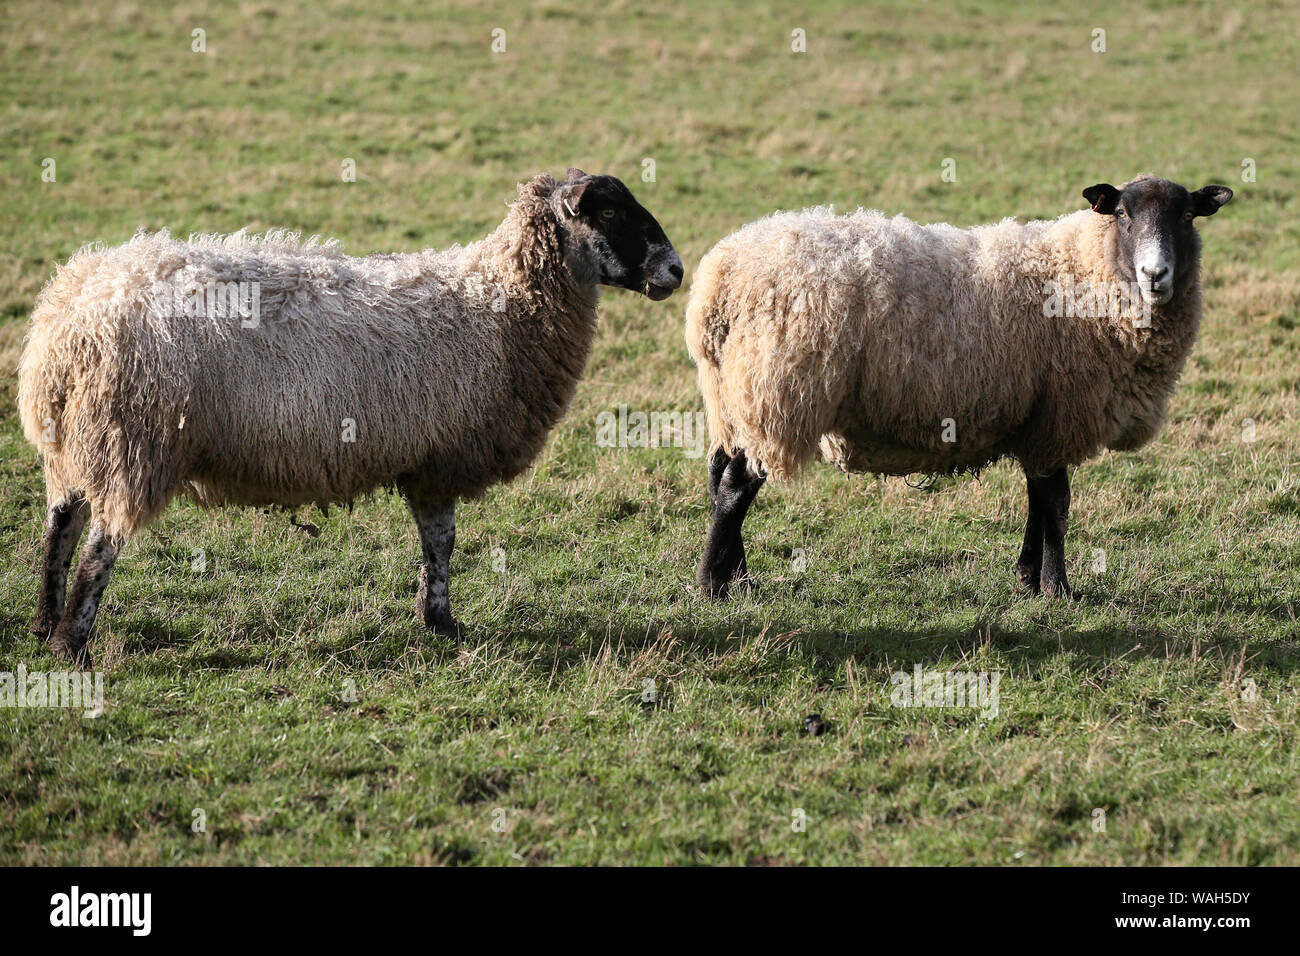 2 sheep - ovis aries - in a a field viewed side on Stock Photo